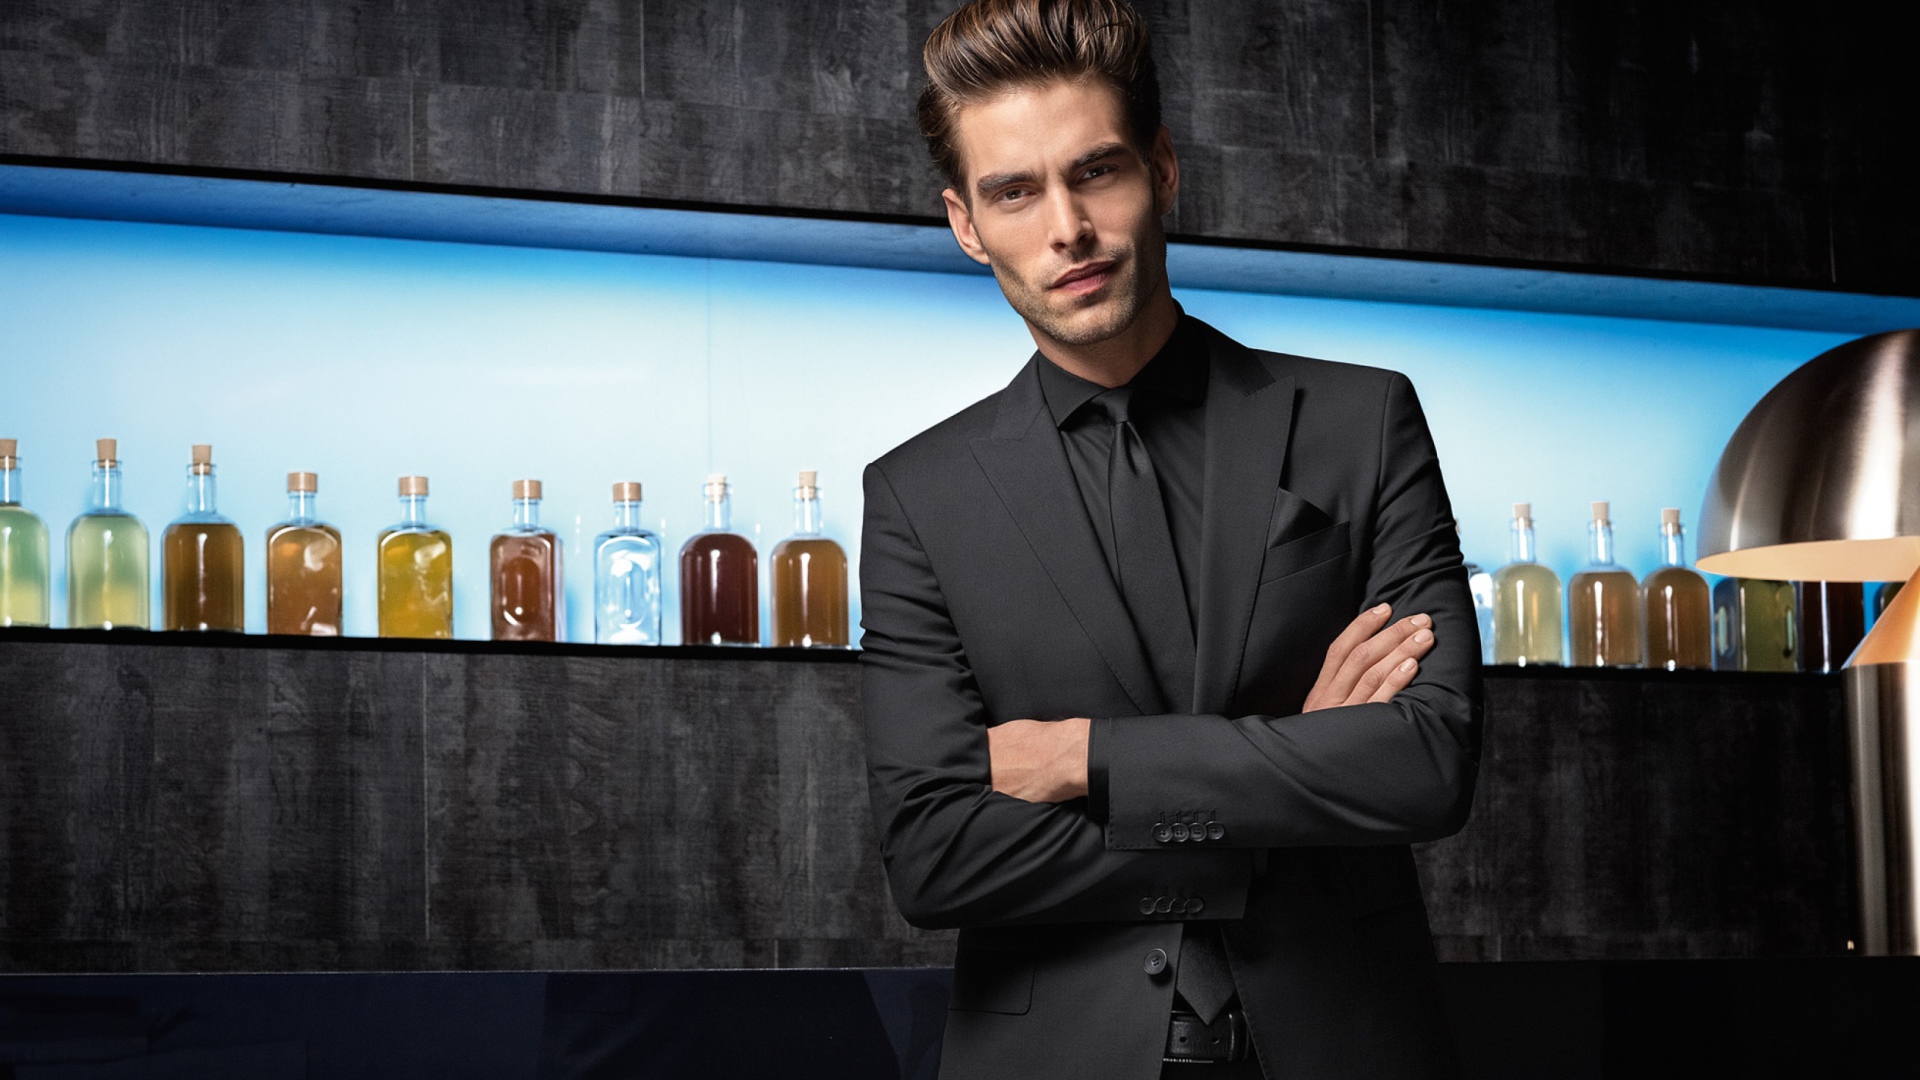 Handsome man in suit at the bar